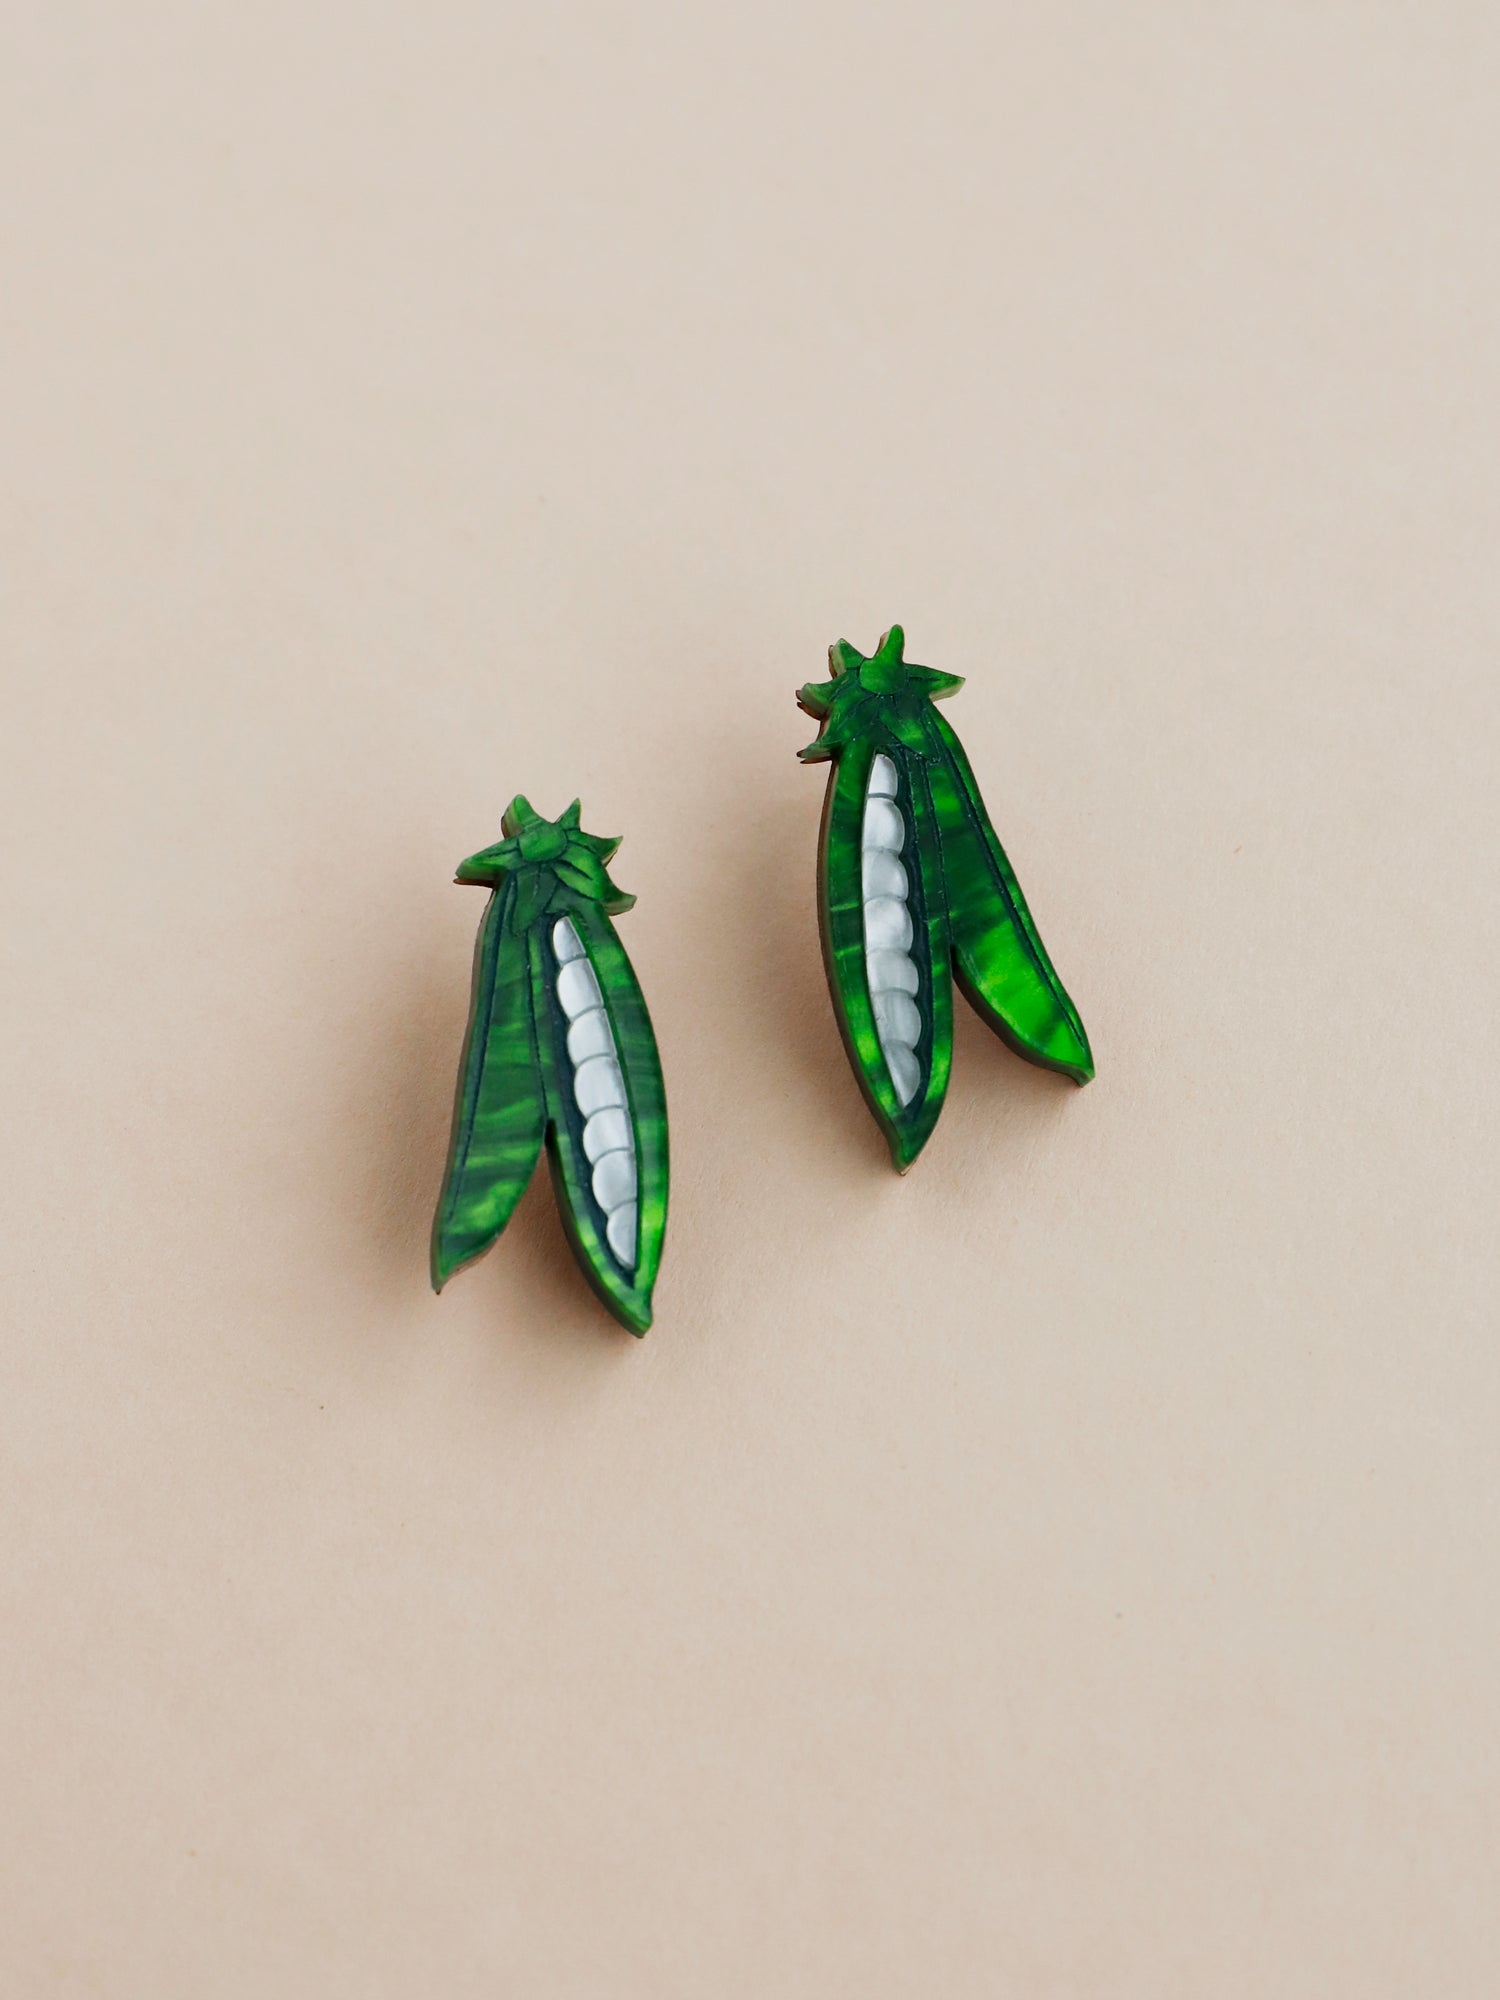 These playful peas in a pod stud earrings are made from marbled acrylic, wood with sterling silver posts. Handmade in London by Wolf & Moon.